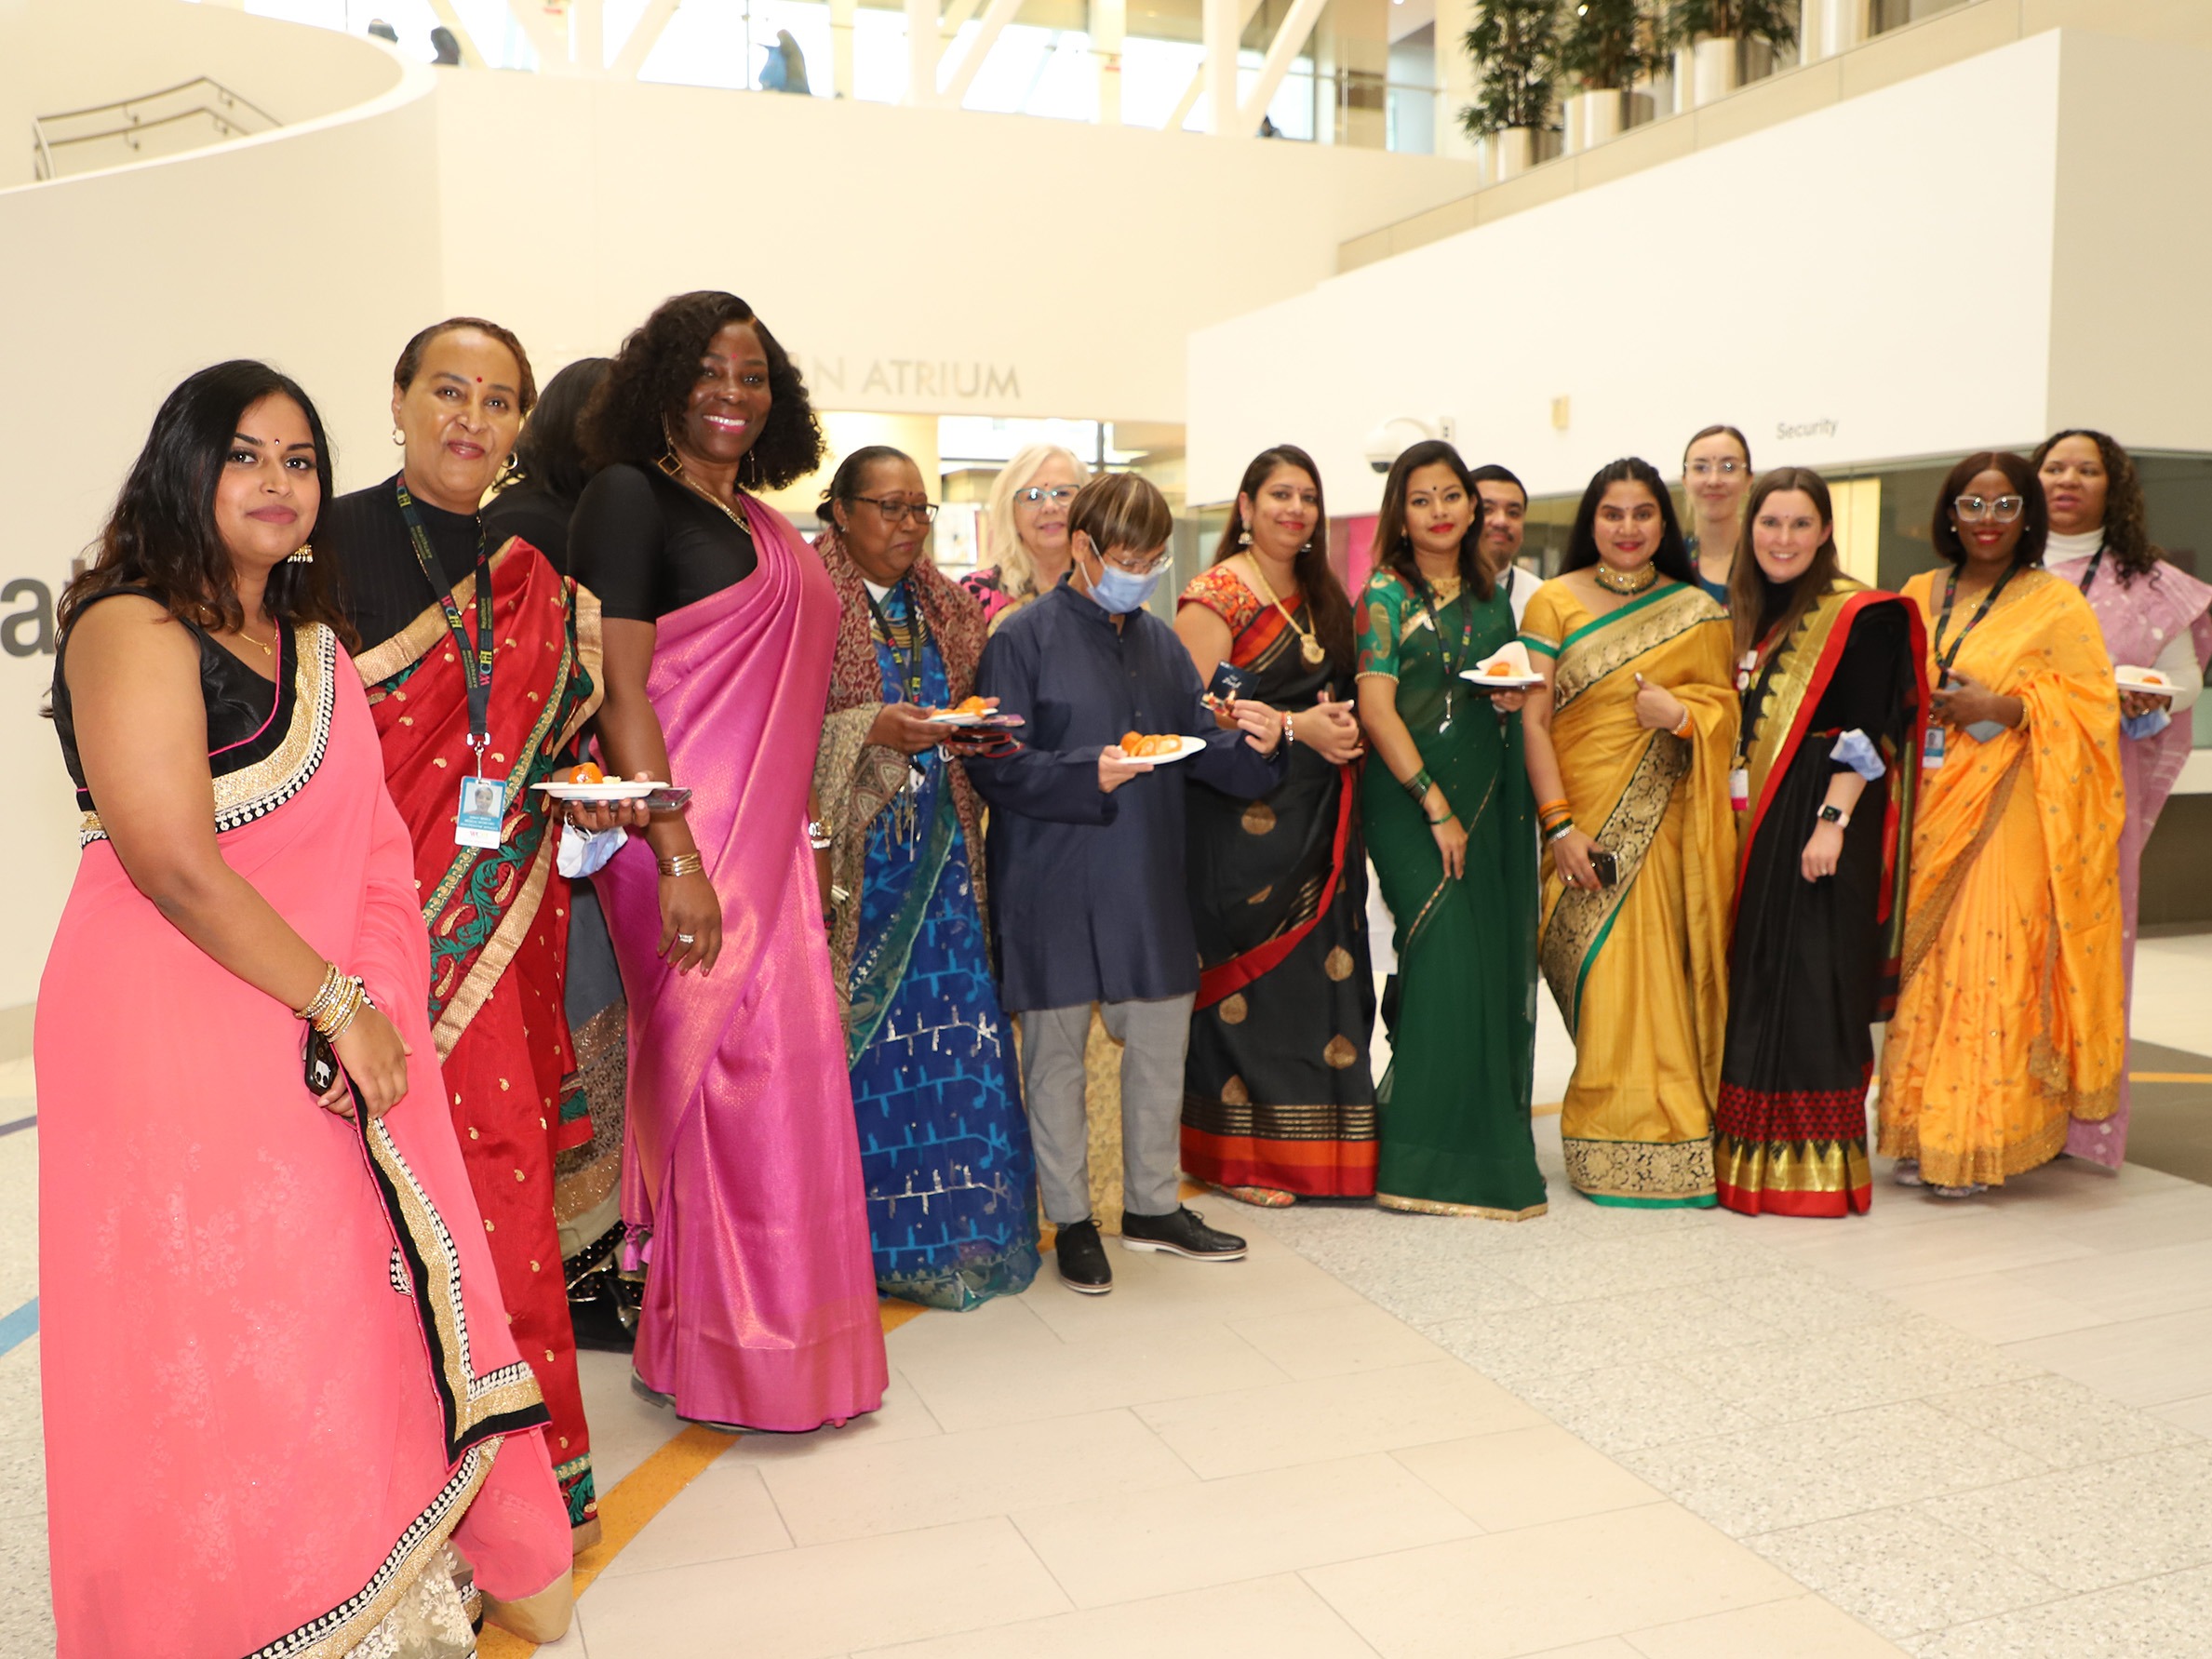 Group photo of WCH staff wearing saris smiling